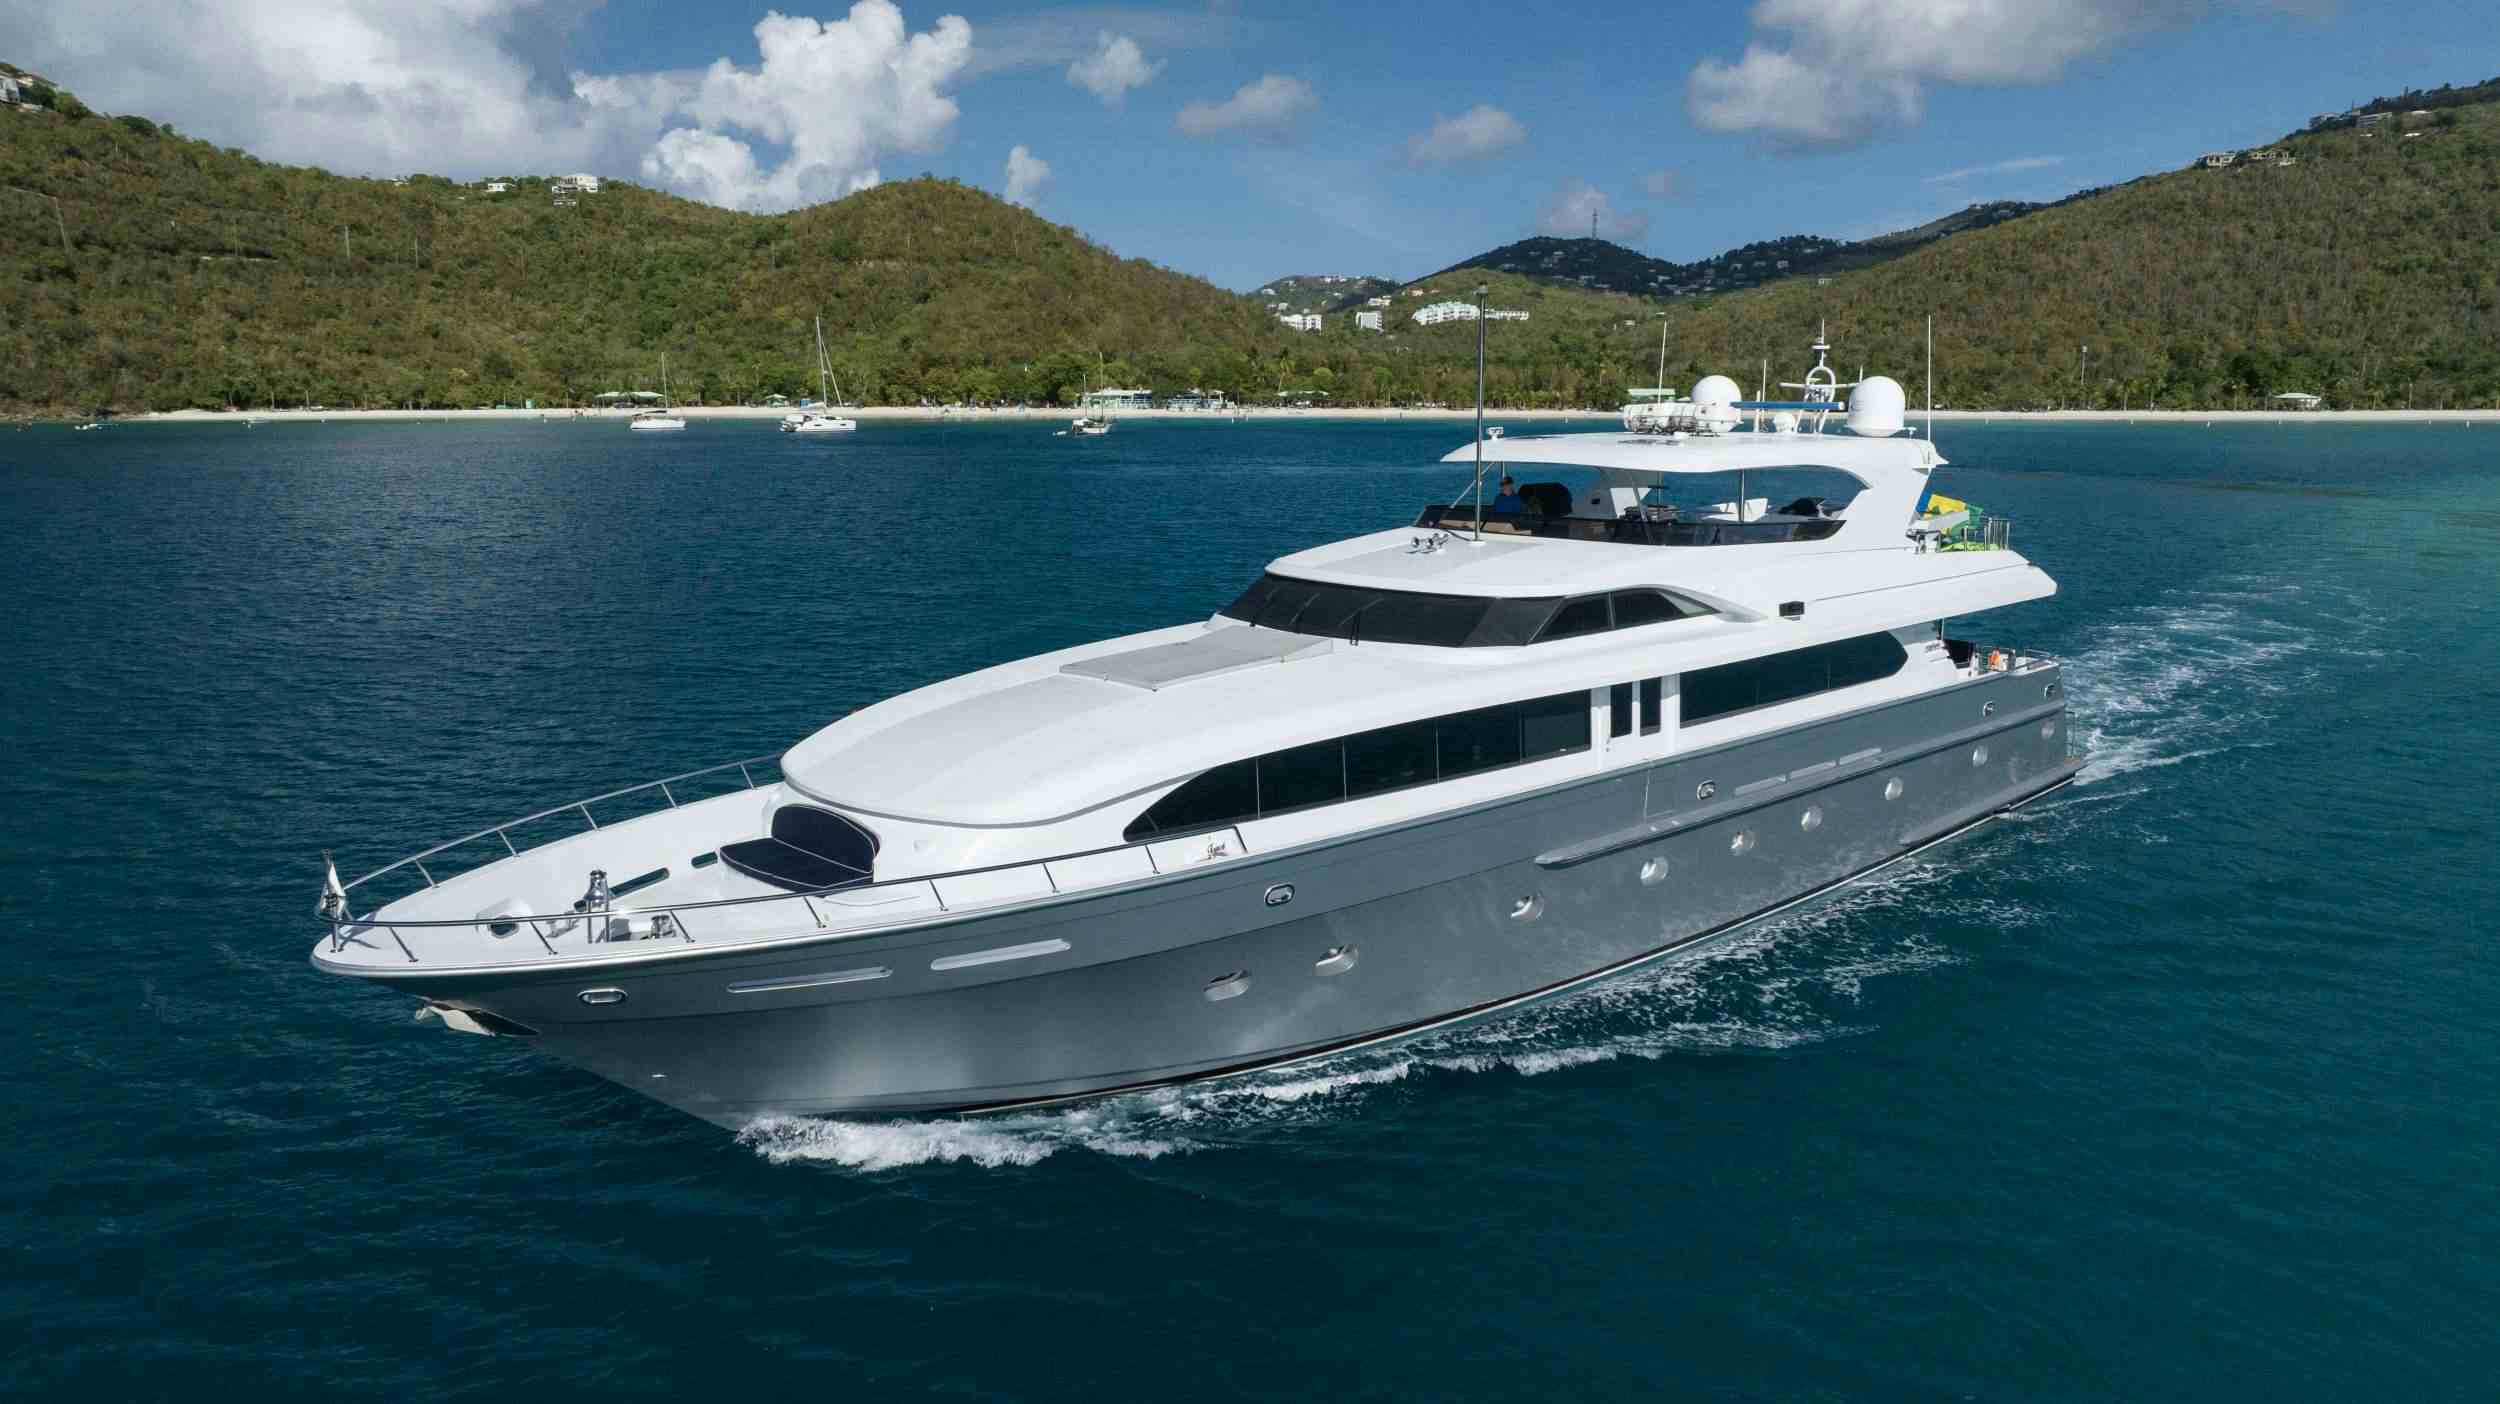 OUTTA TOUCH - Yacht Charter St Thomas & Boat hire in Caribbean Virgin Islands 1